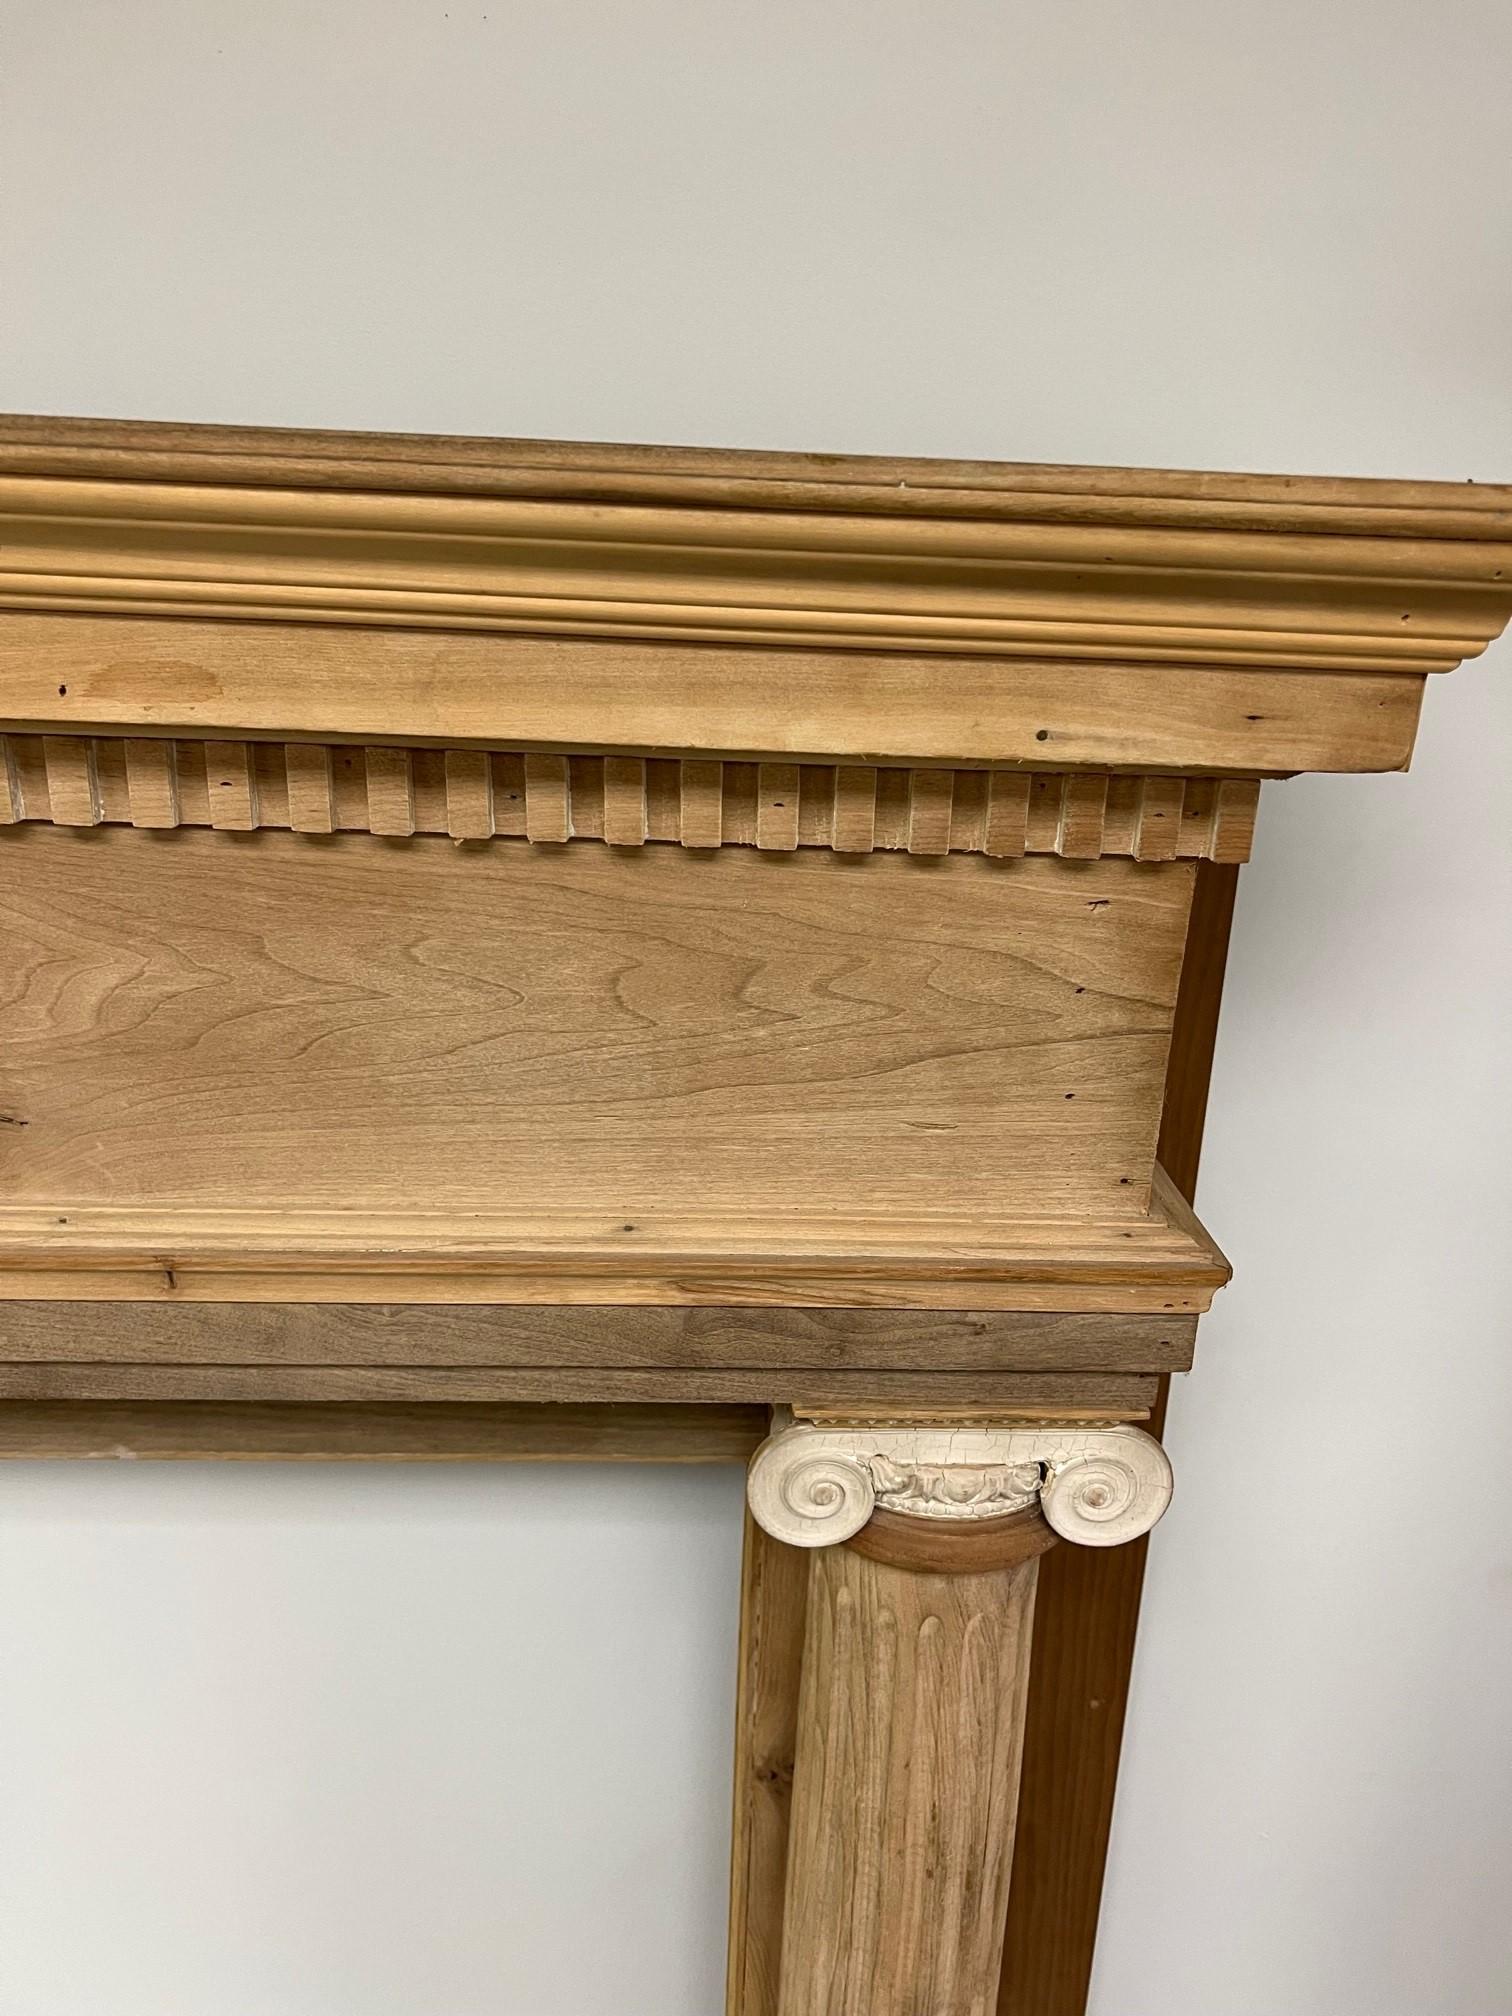 Early 20th Century Antique Wood Mantel with Round Columns and Gesso Capitals In Good Condition For Sale In Stamford, CT